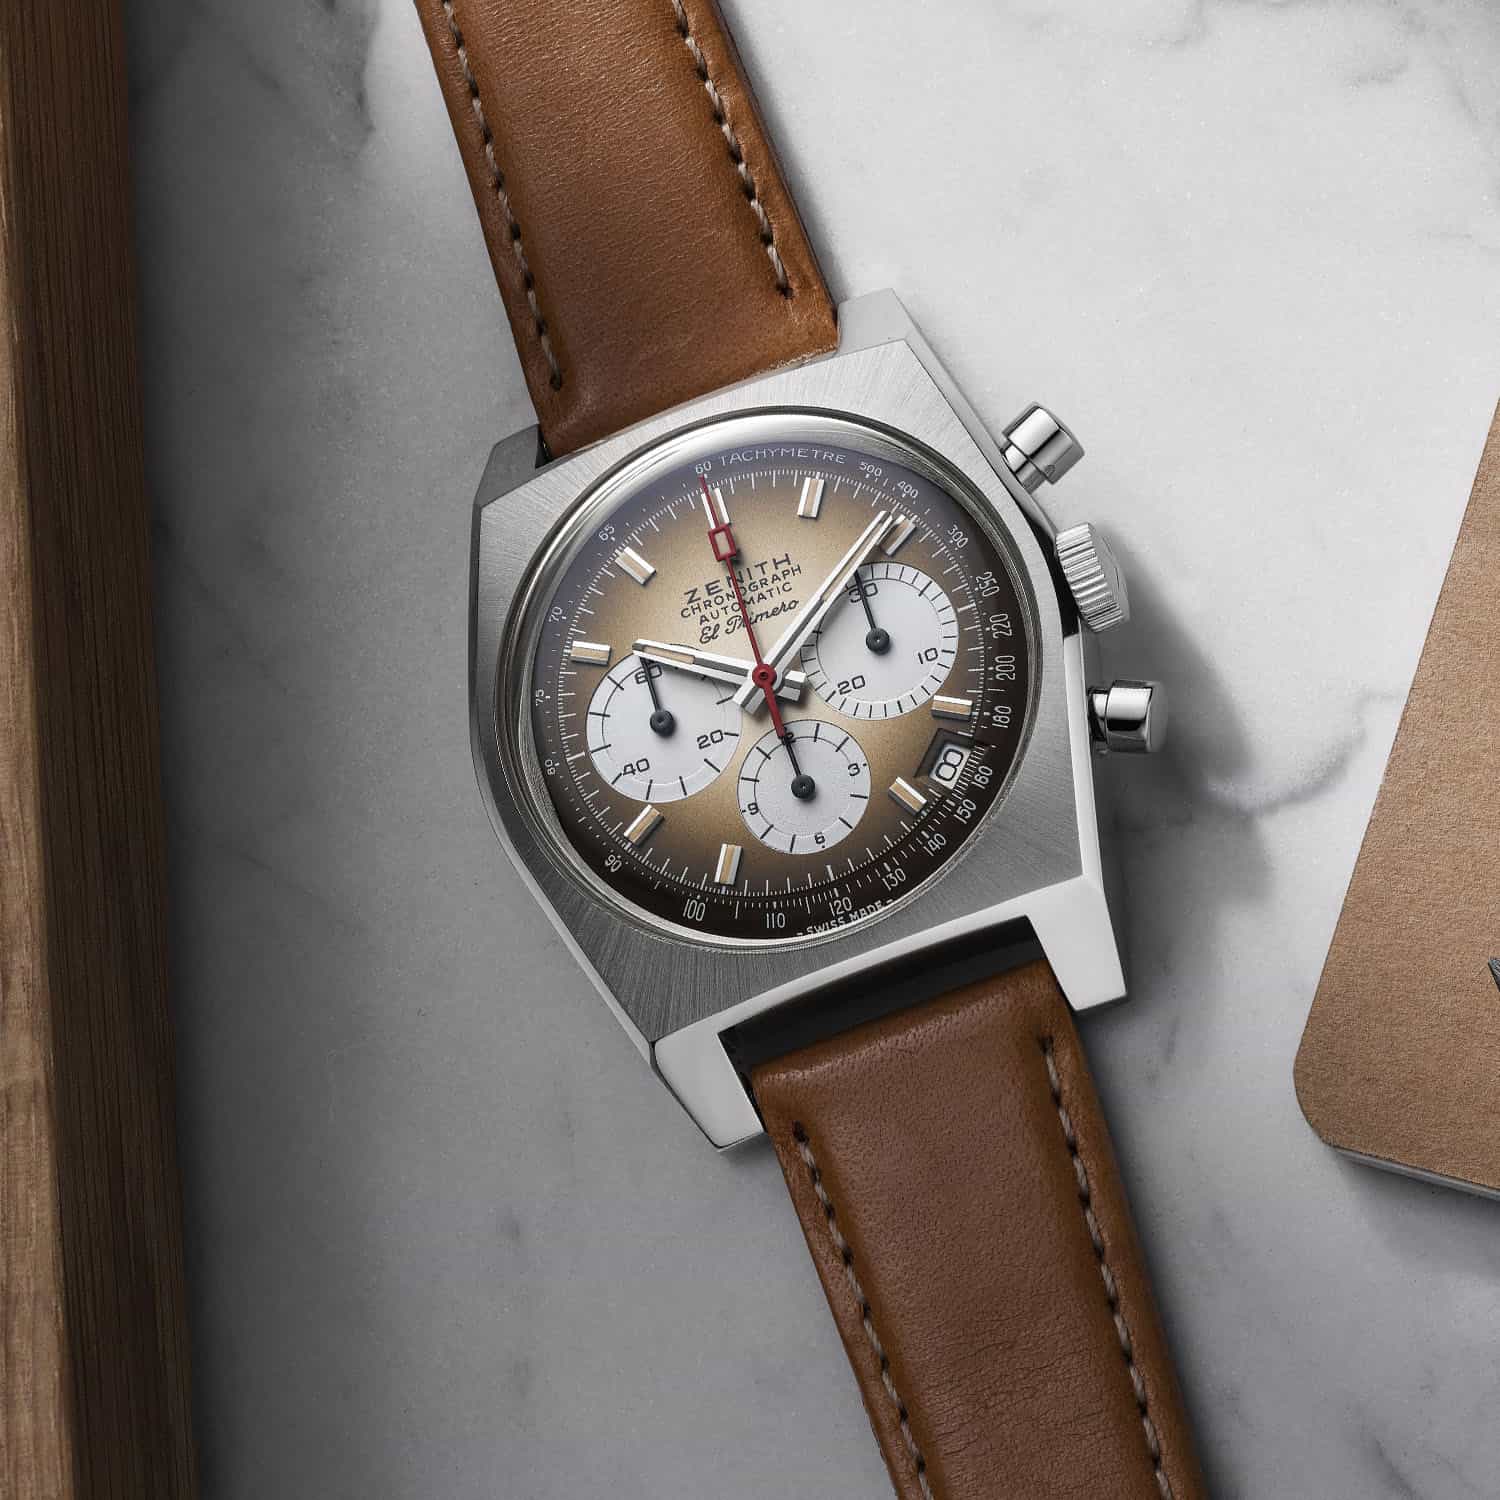 Introducing The Zenith Chronomaster A385 Revival